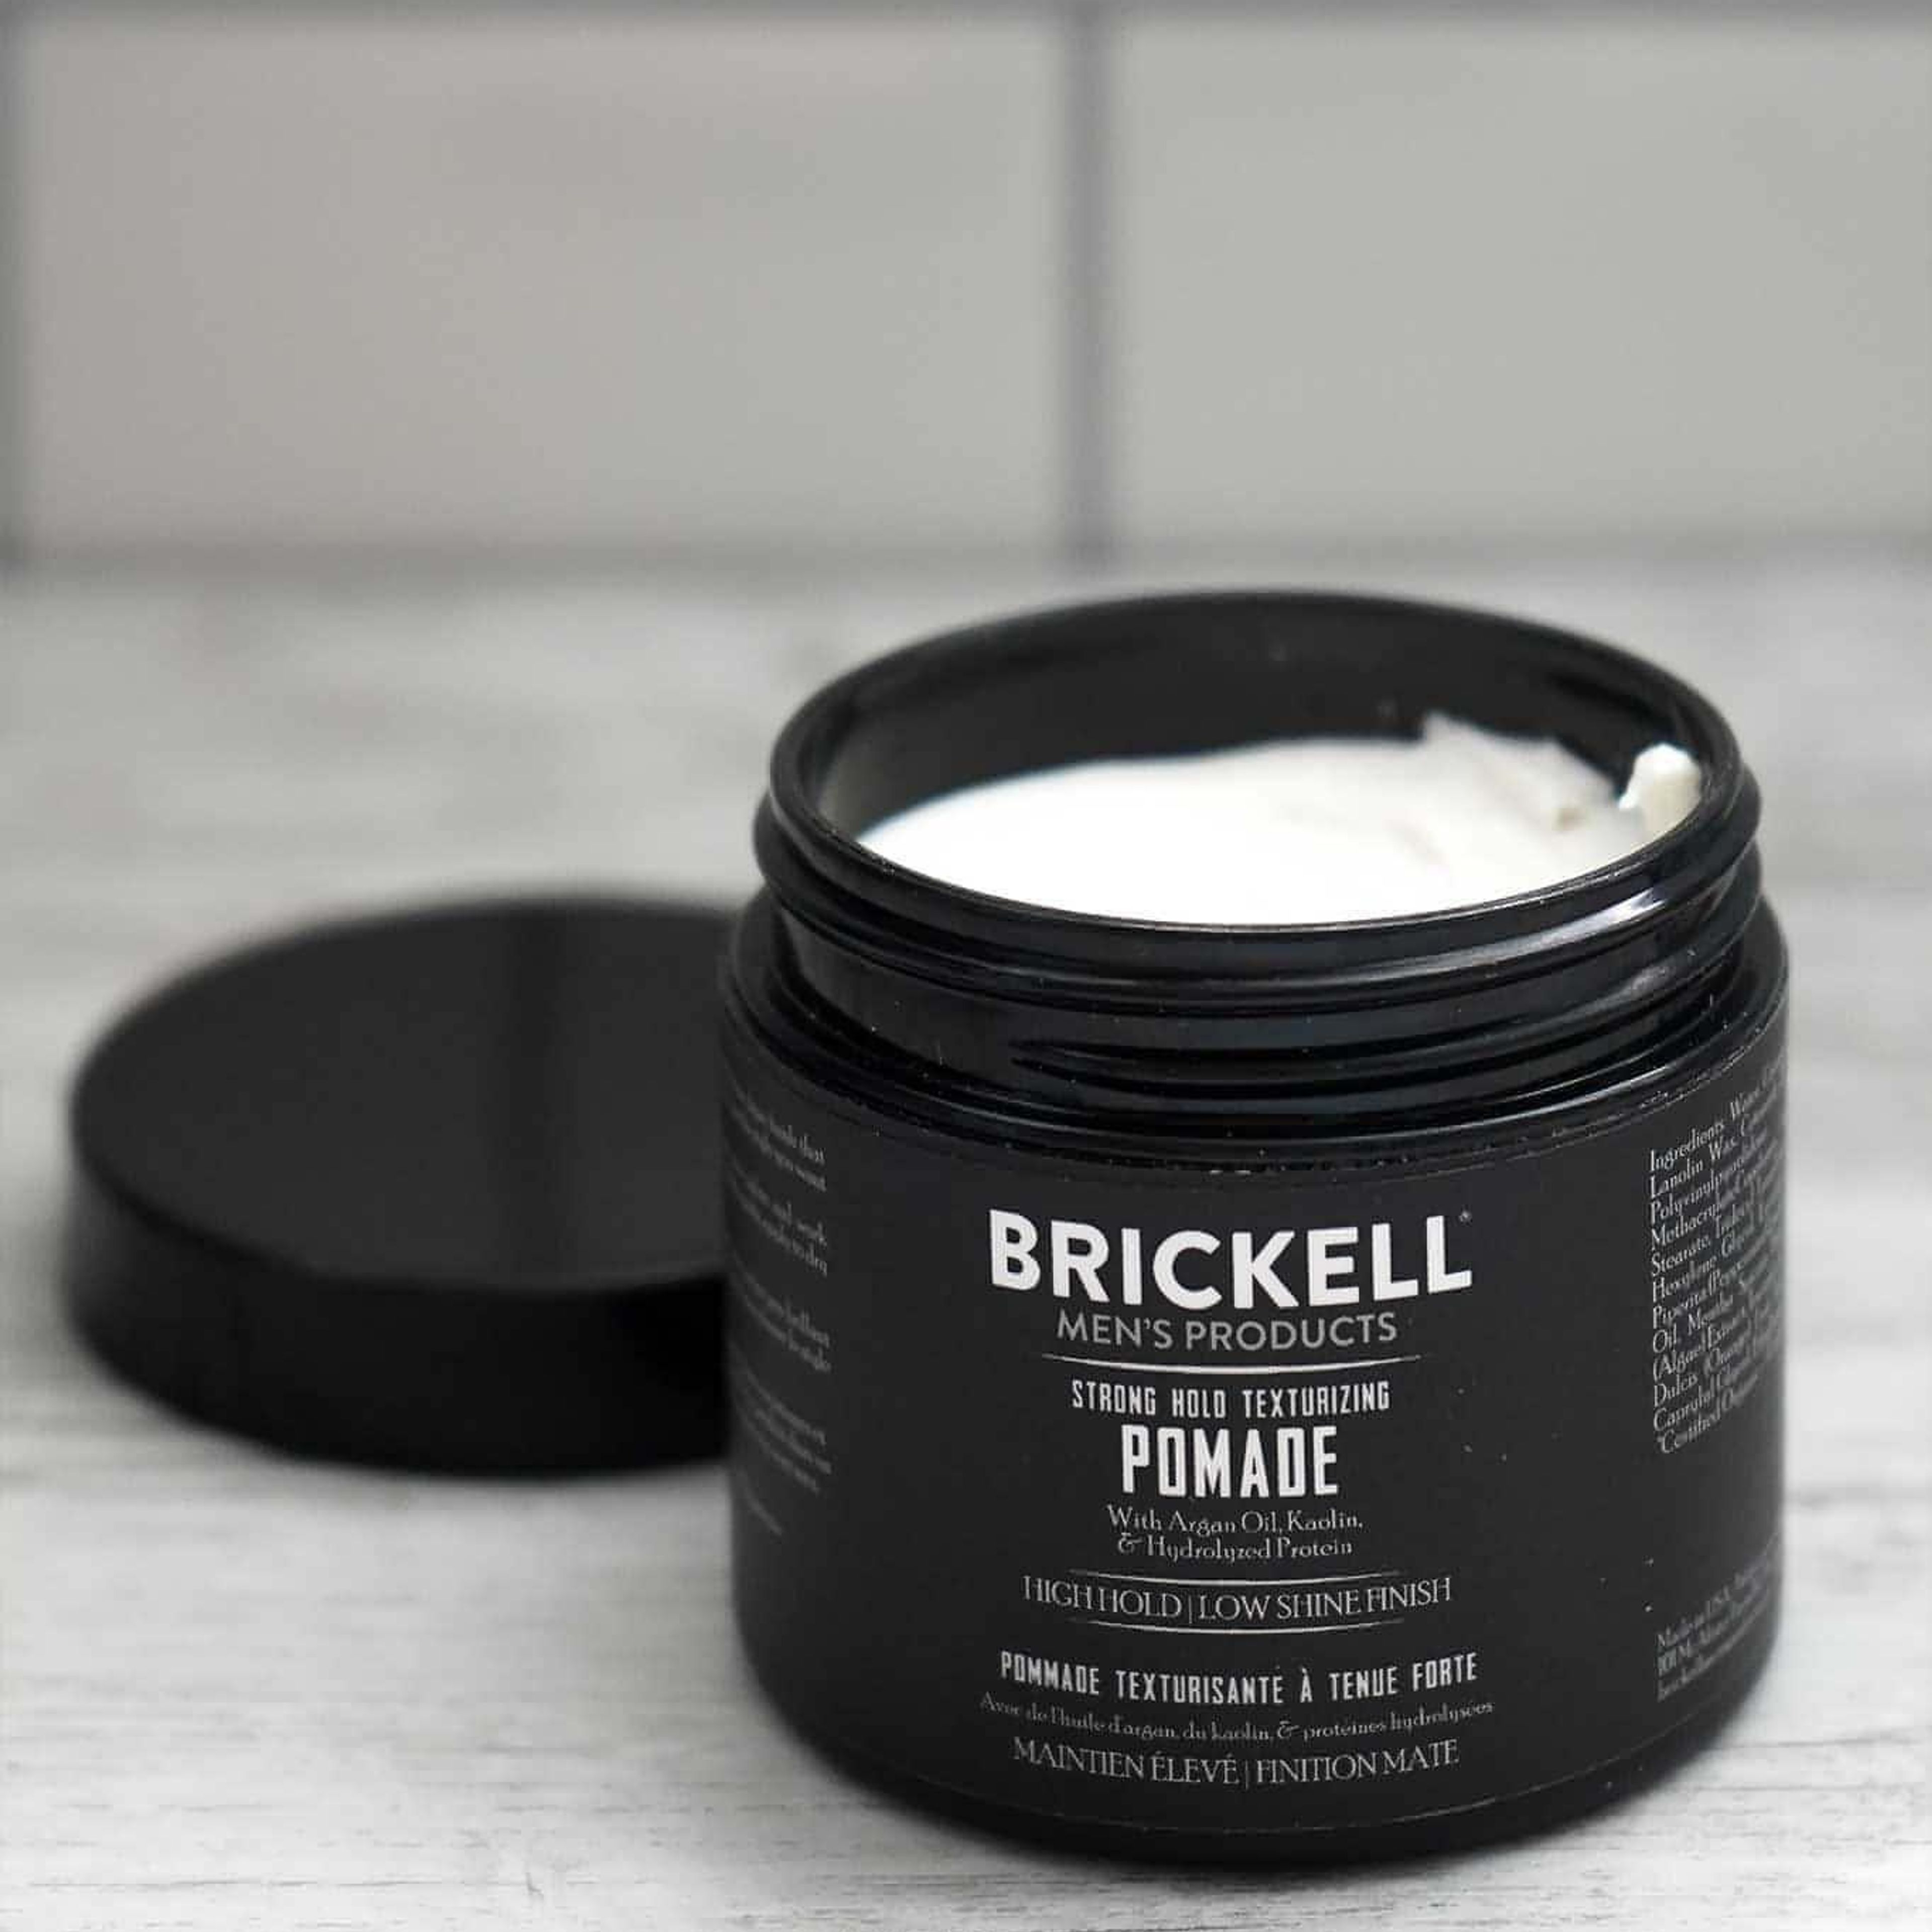 Strong Hold Texturizing Pomade for Men